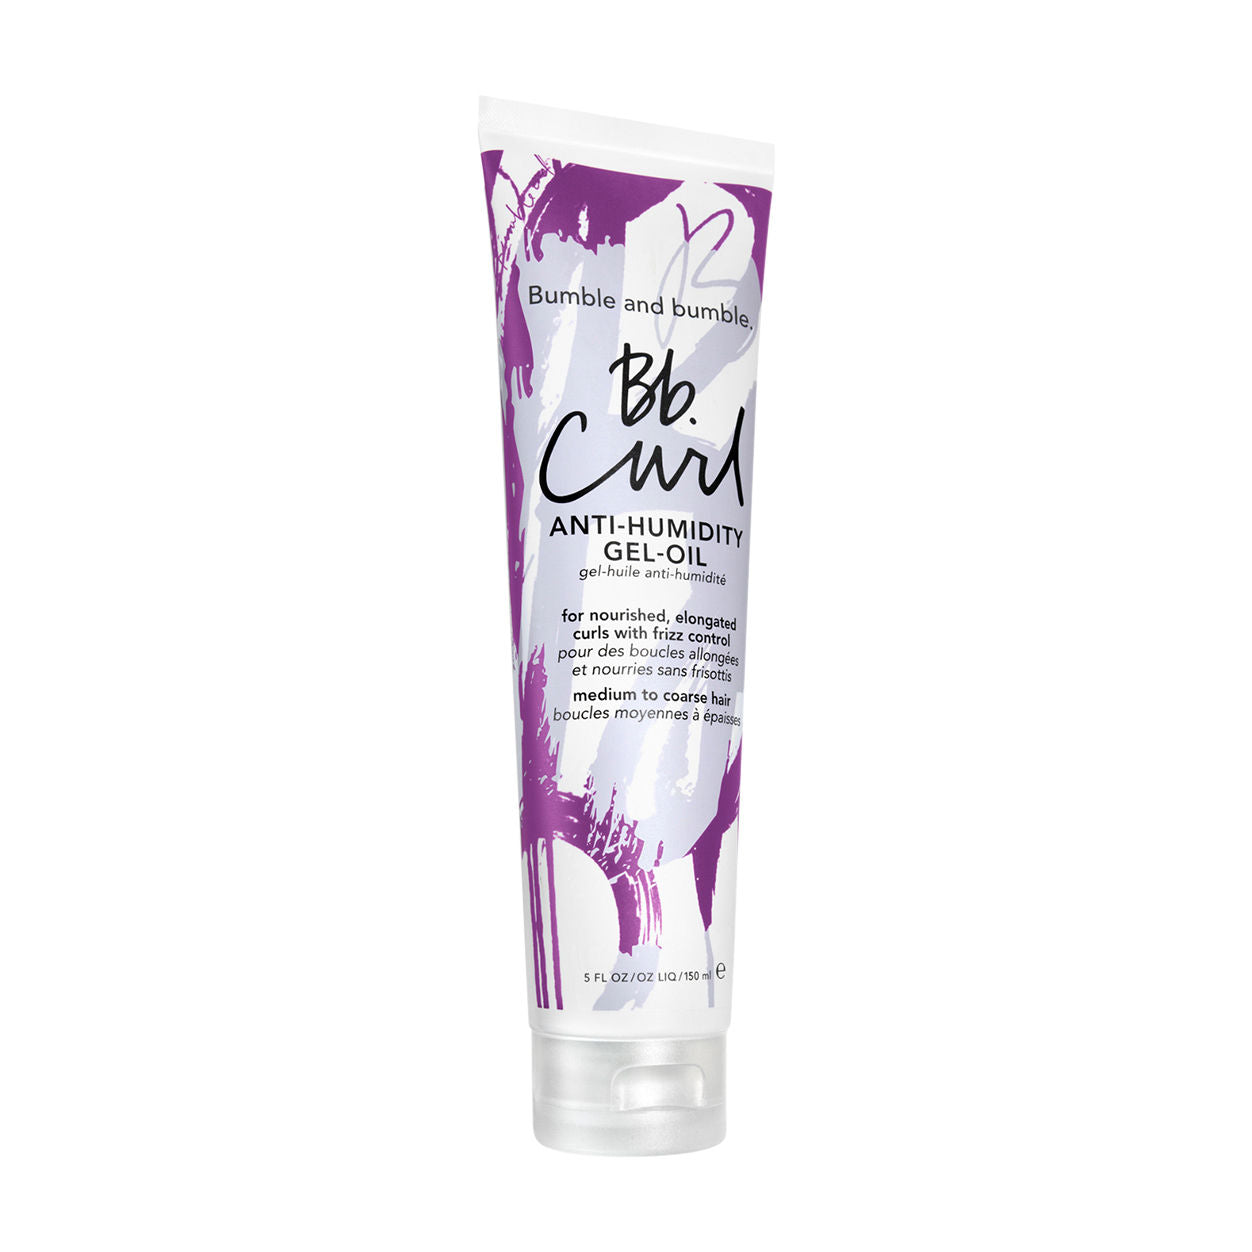 Bumble and Bumble Curl Anti-Humidity Gel Oil main image